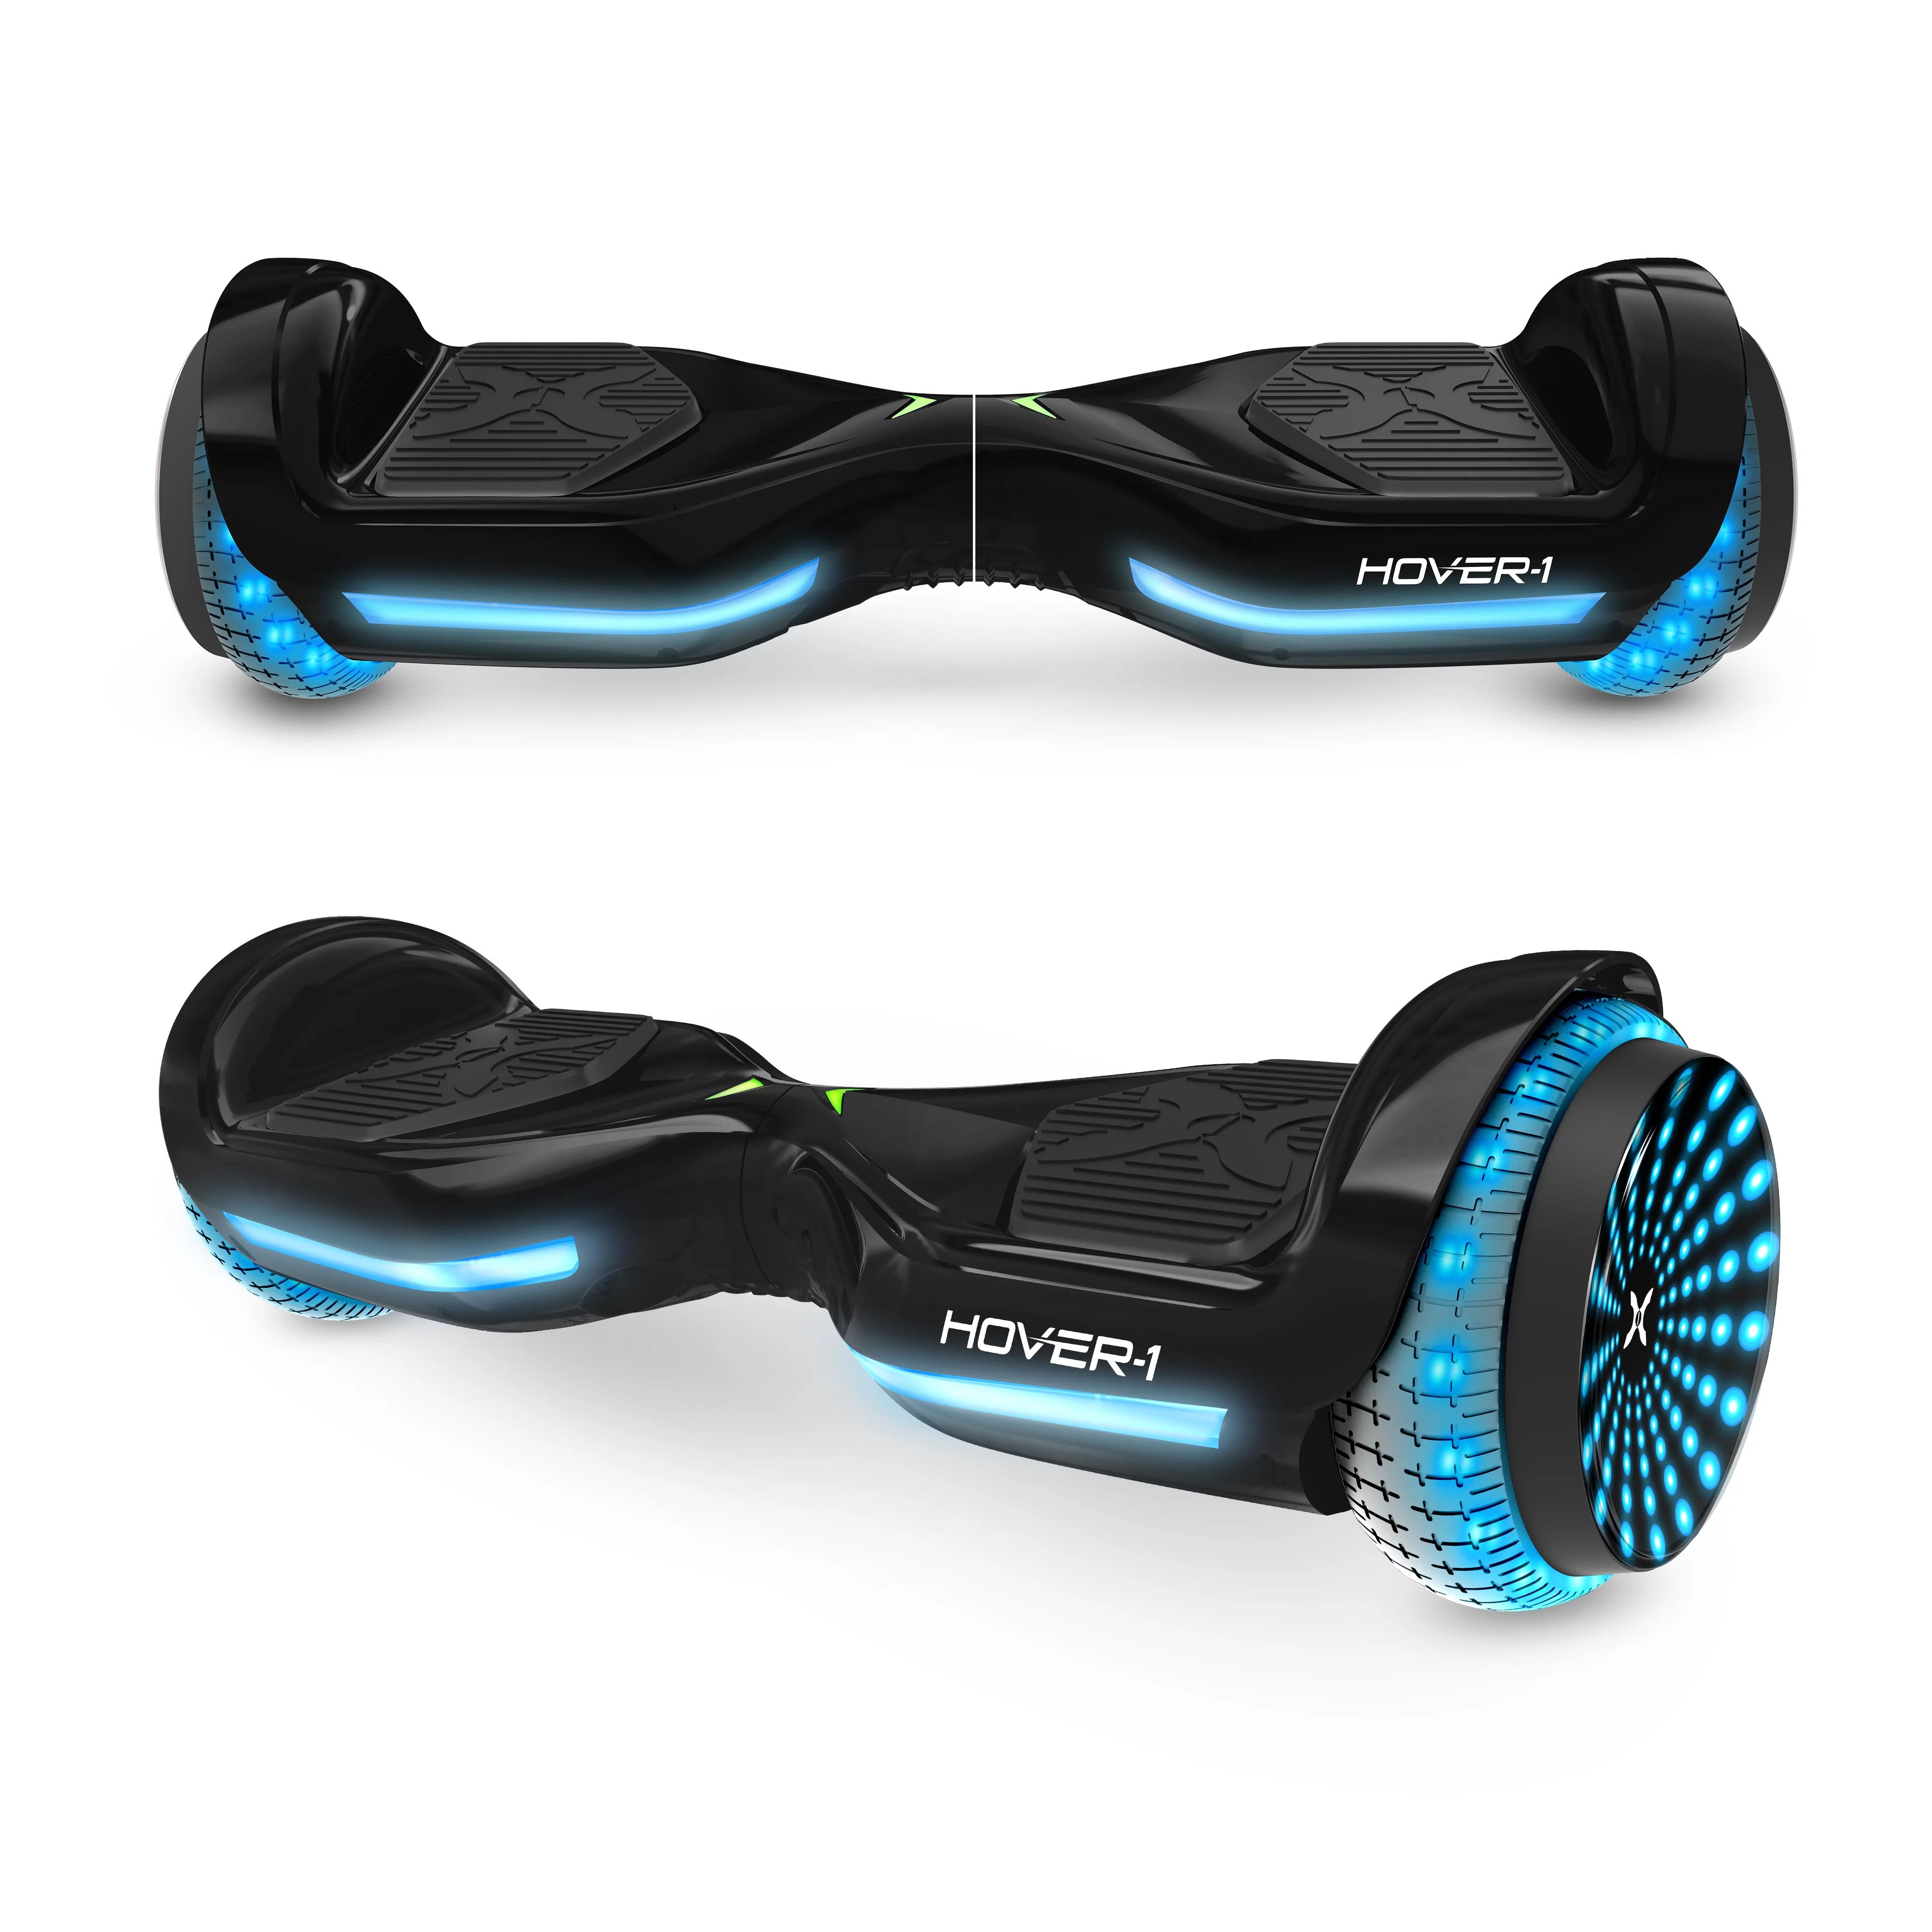 Hover-1 Turbo Hoverboard, LED Infinity Wheels, LED Headlights, 220 Max Weight, 7 MPH | Walmart (US)